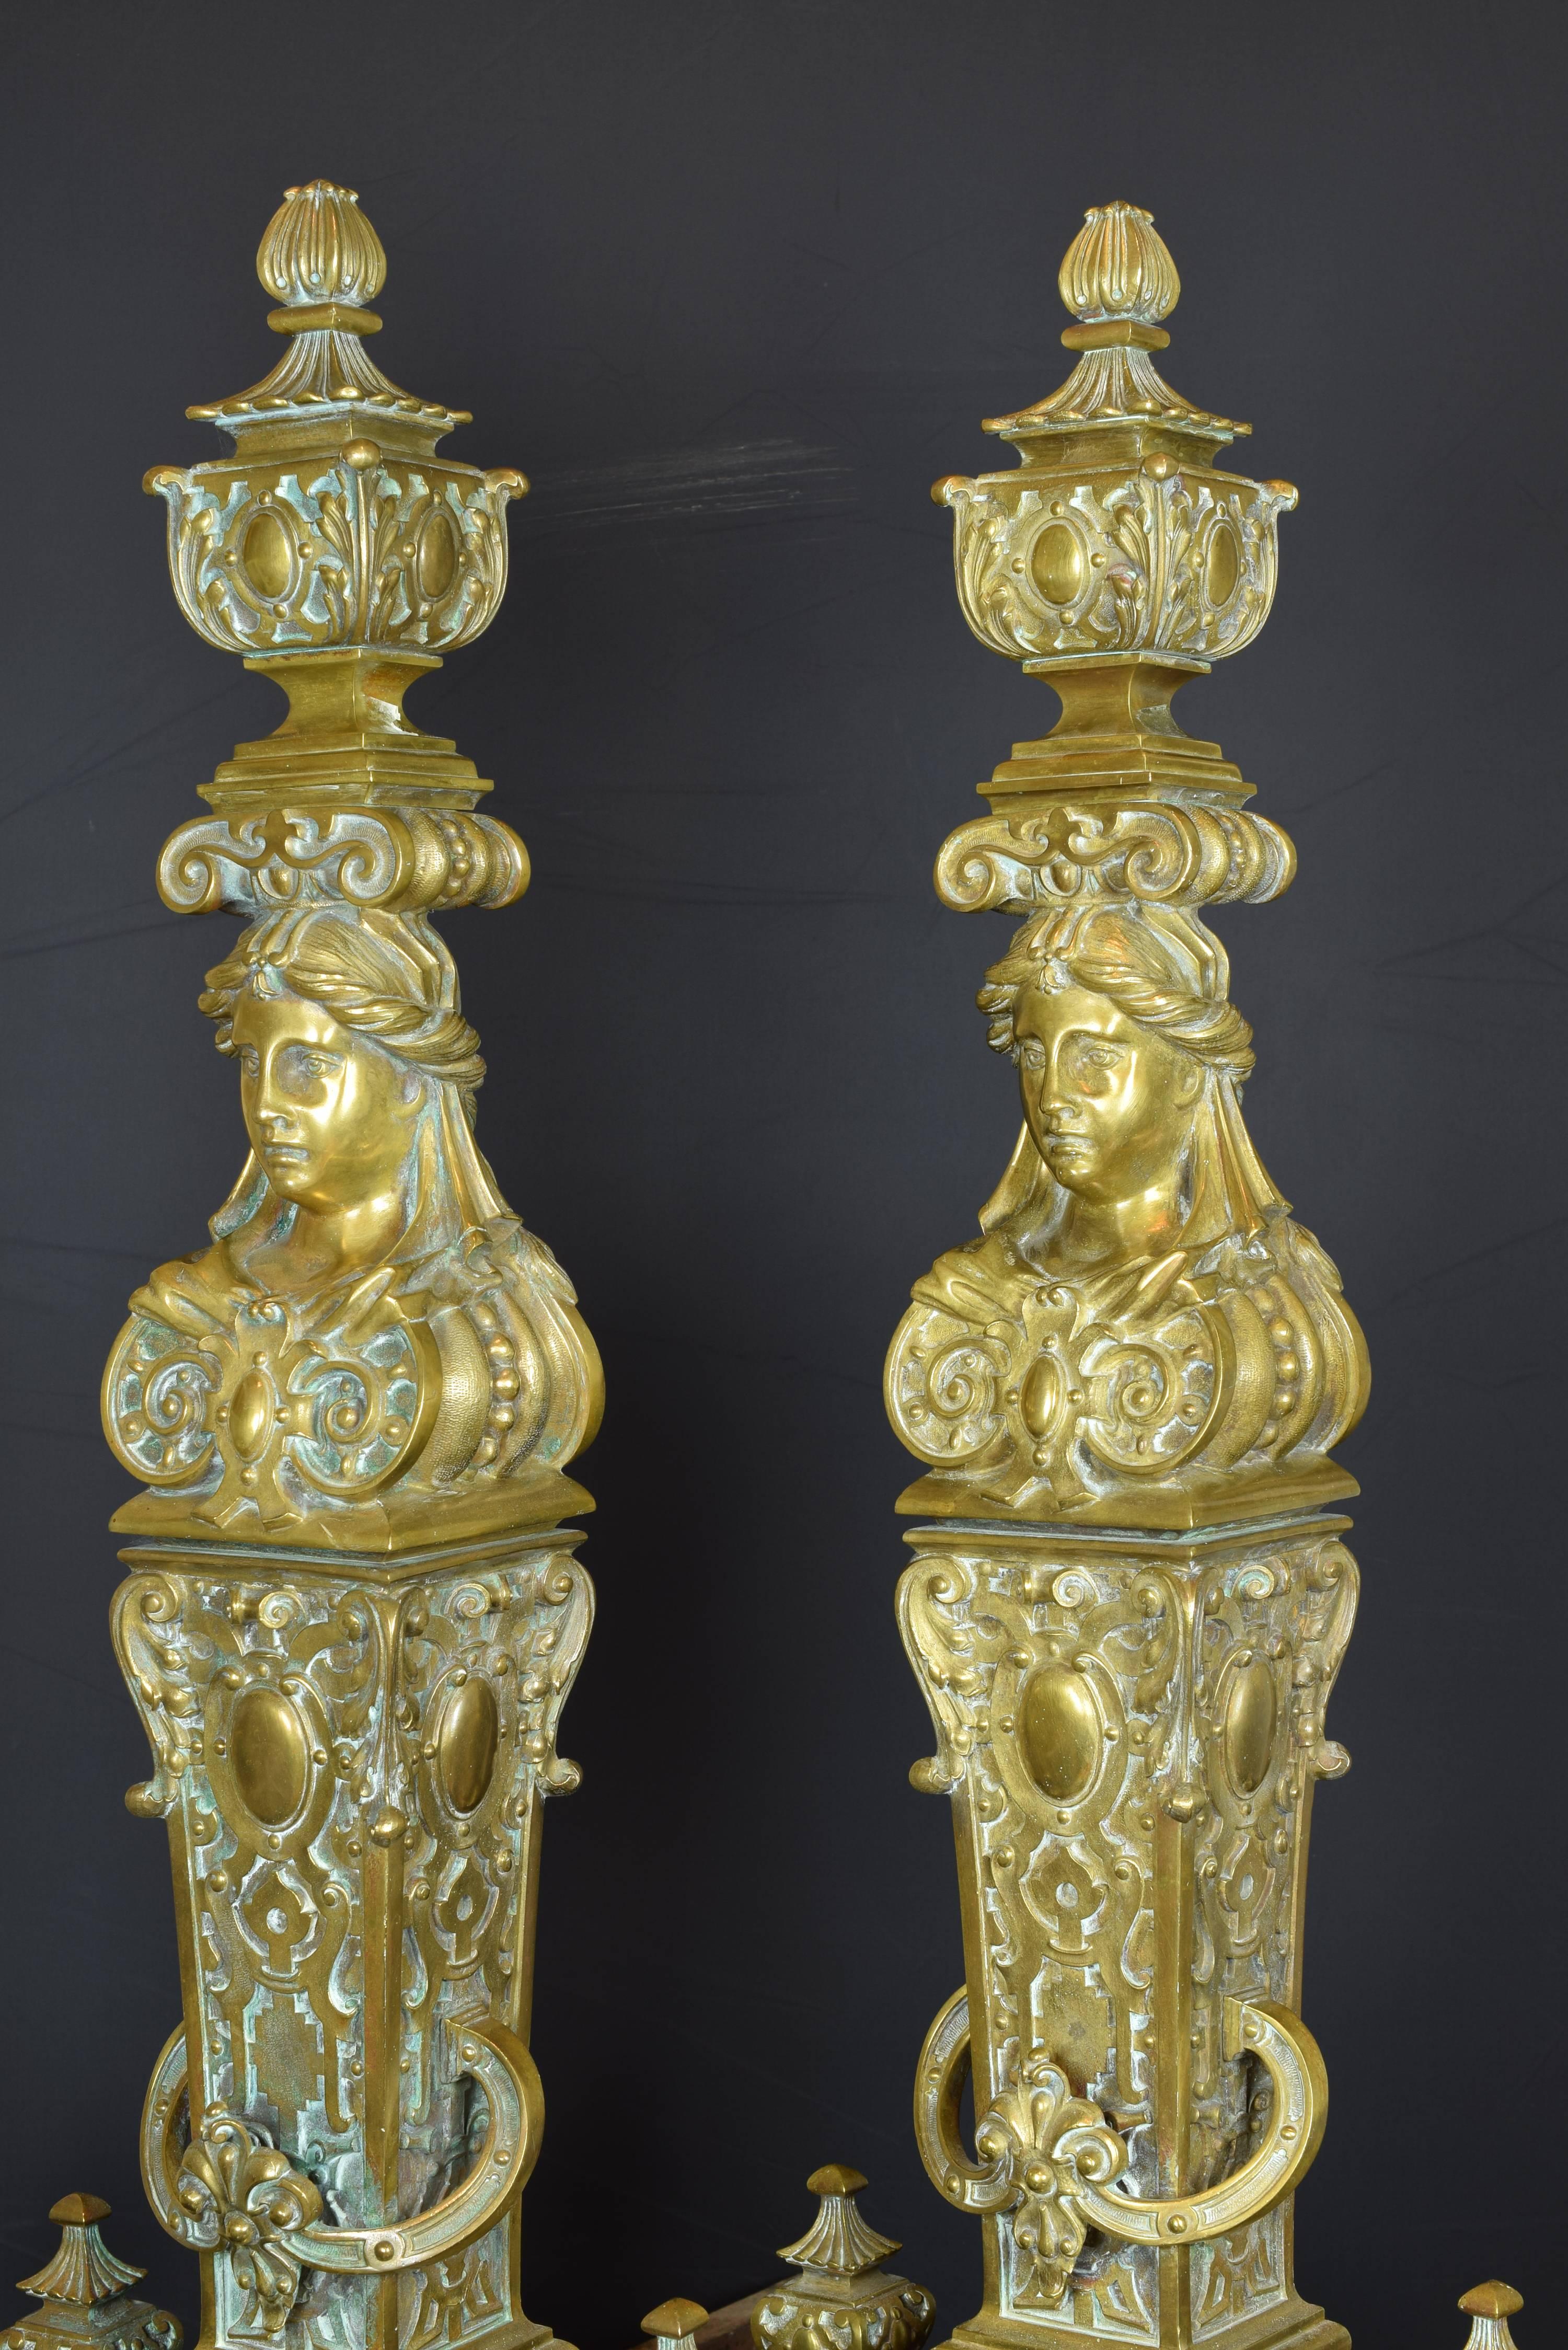 Neoclassical Pair of Bronze Andirons, France, 19th Century